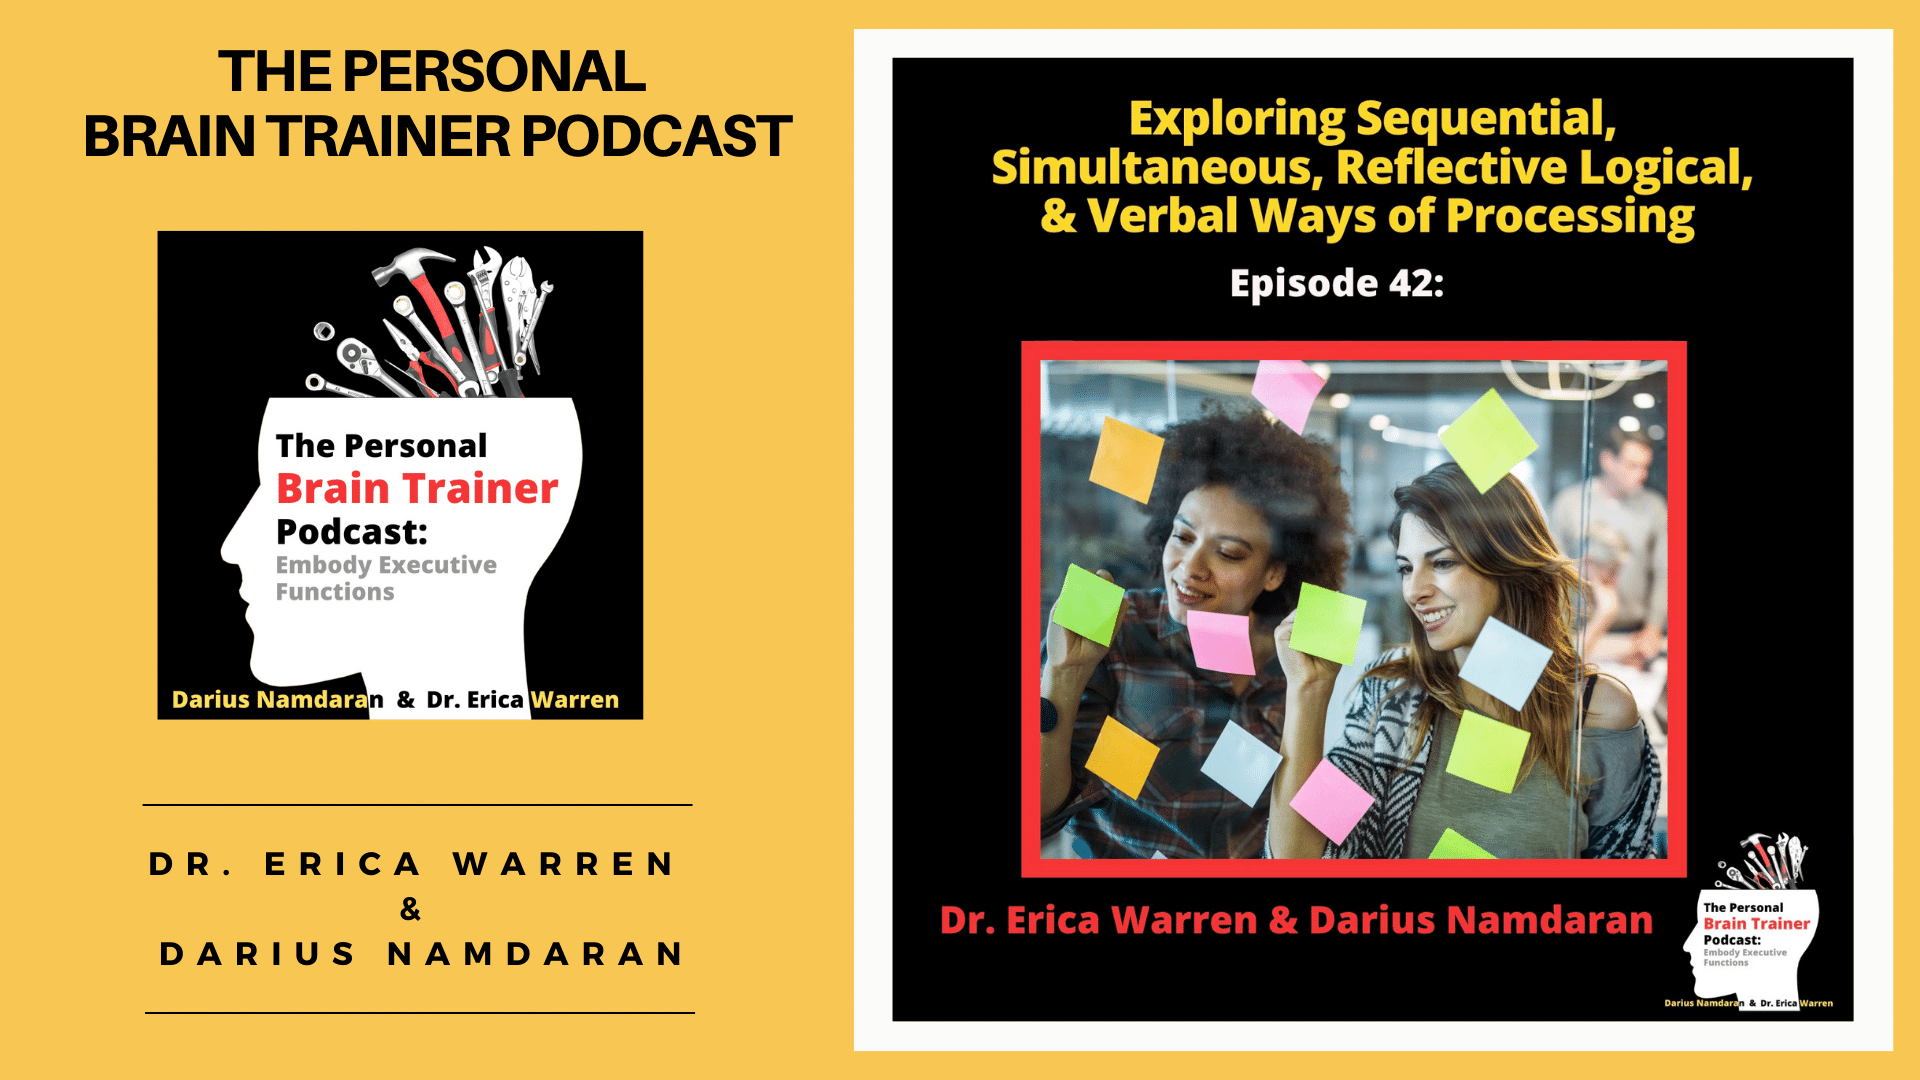 episode 42 of the personal brain trainer podcast